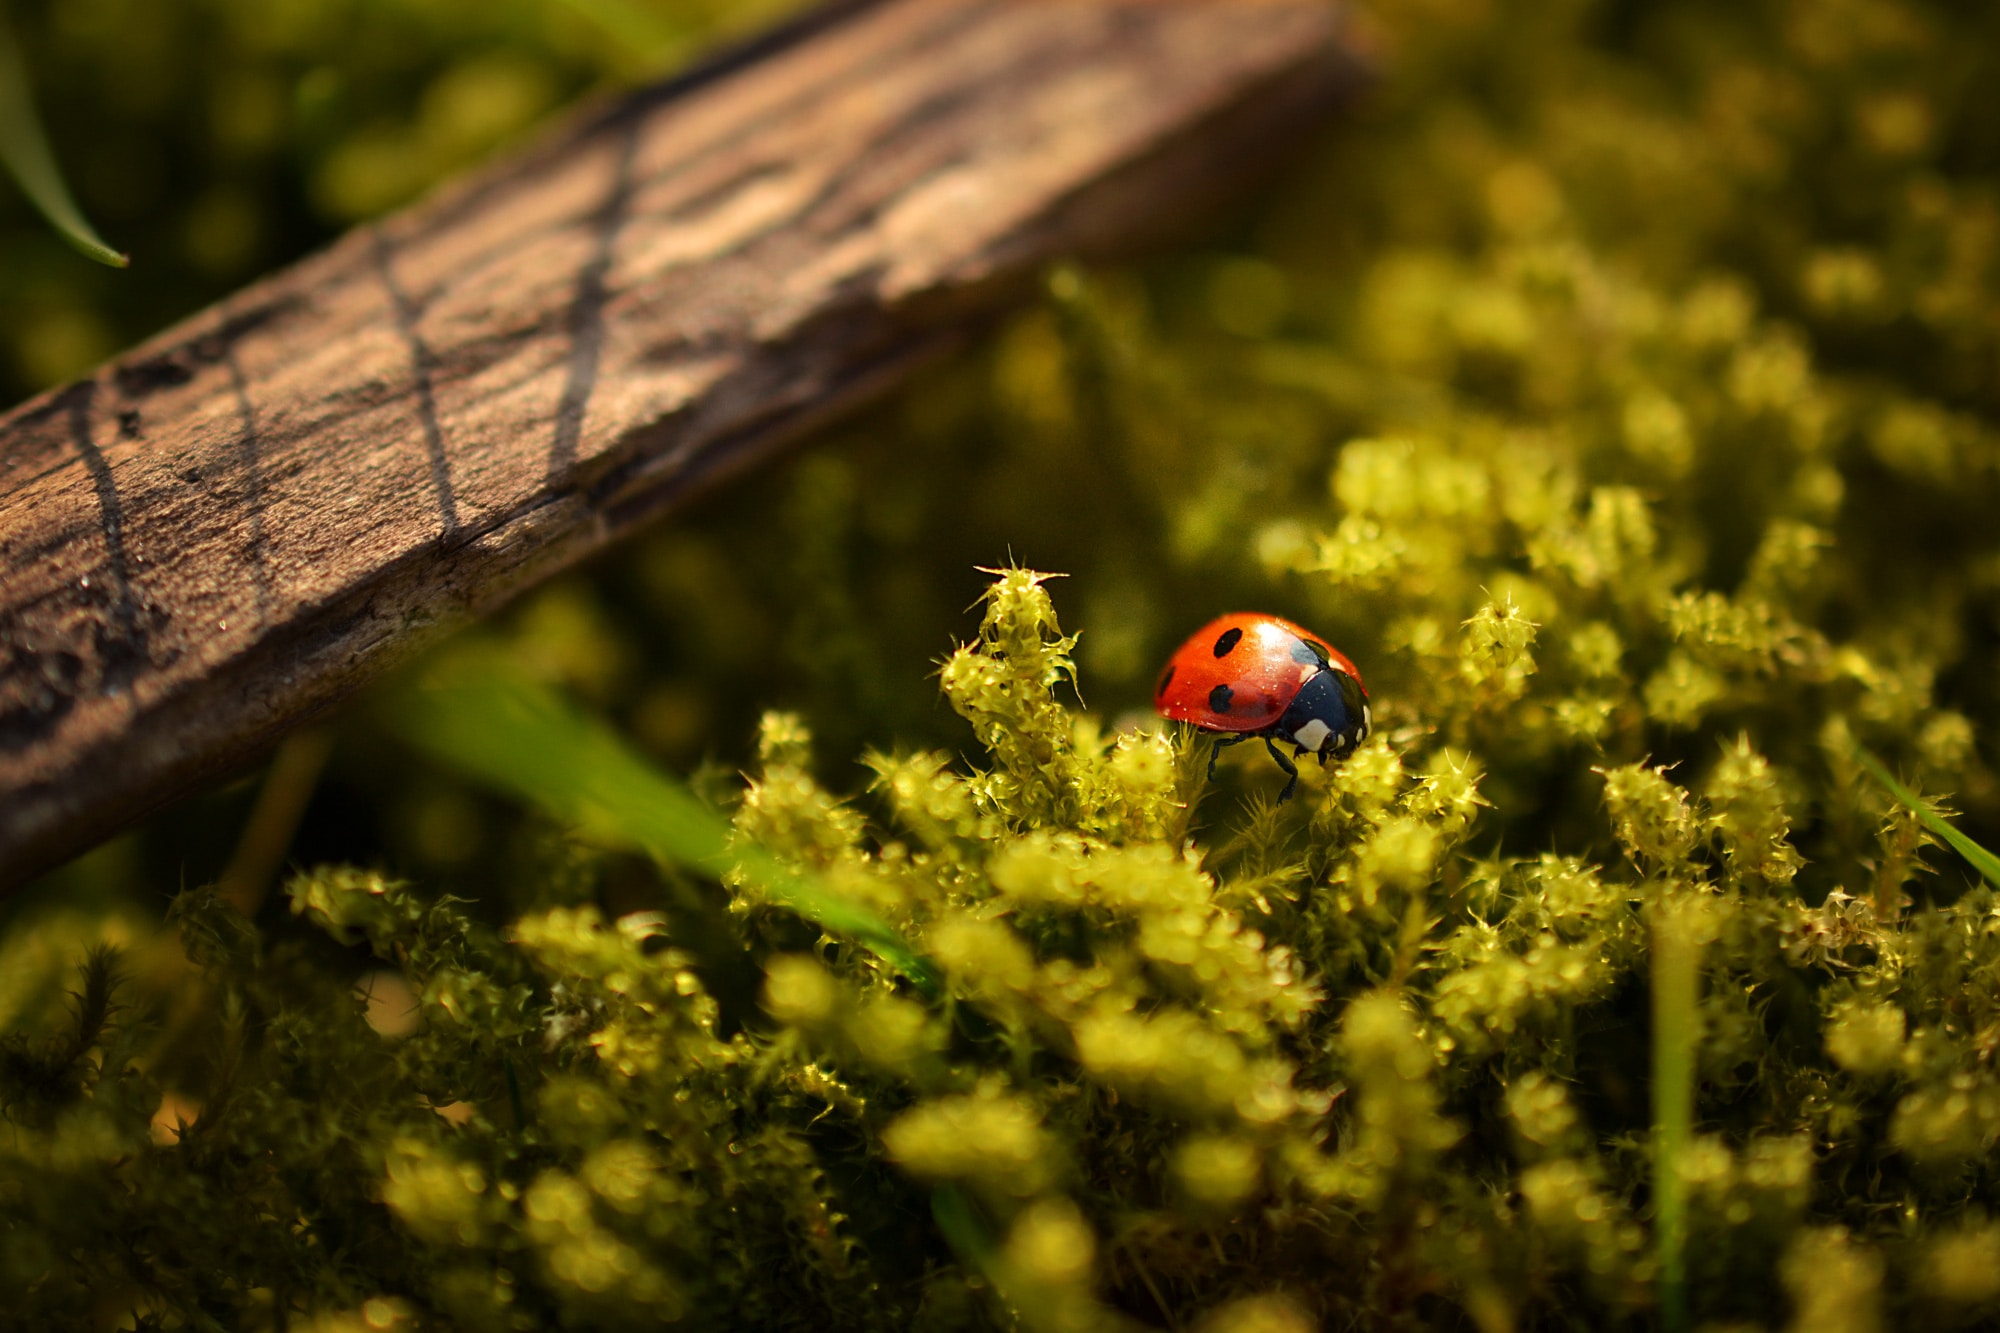 Ladybug perched on green leafed plant